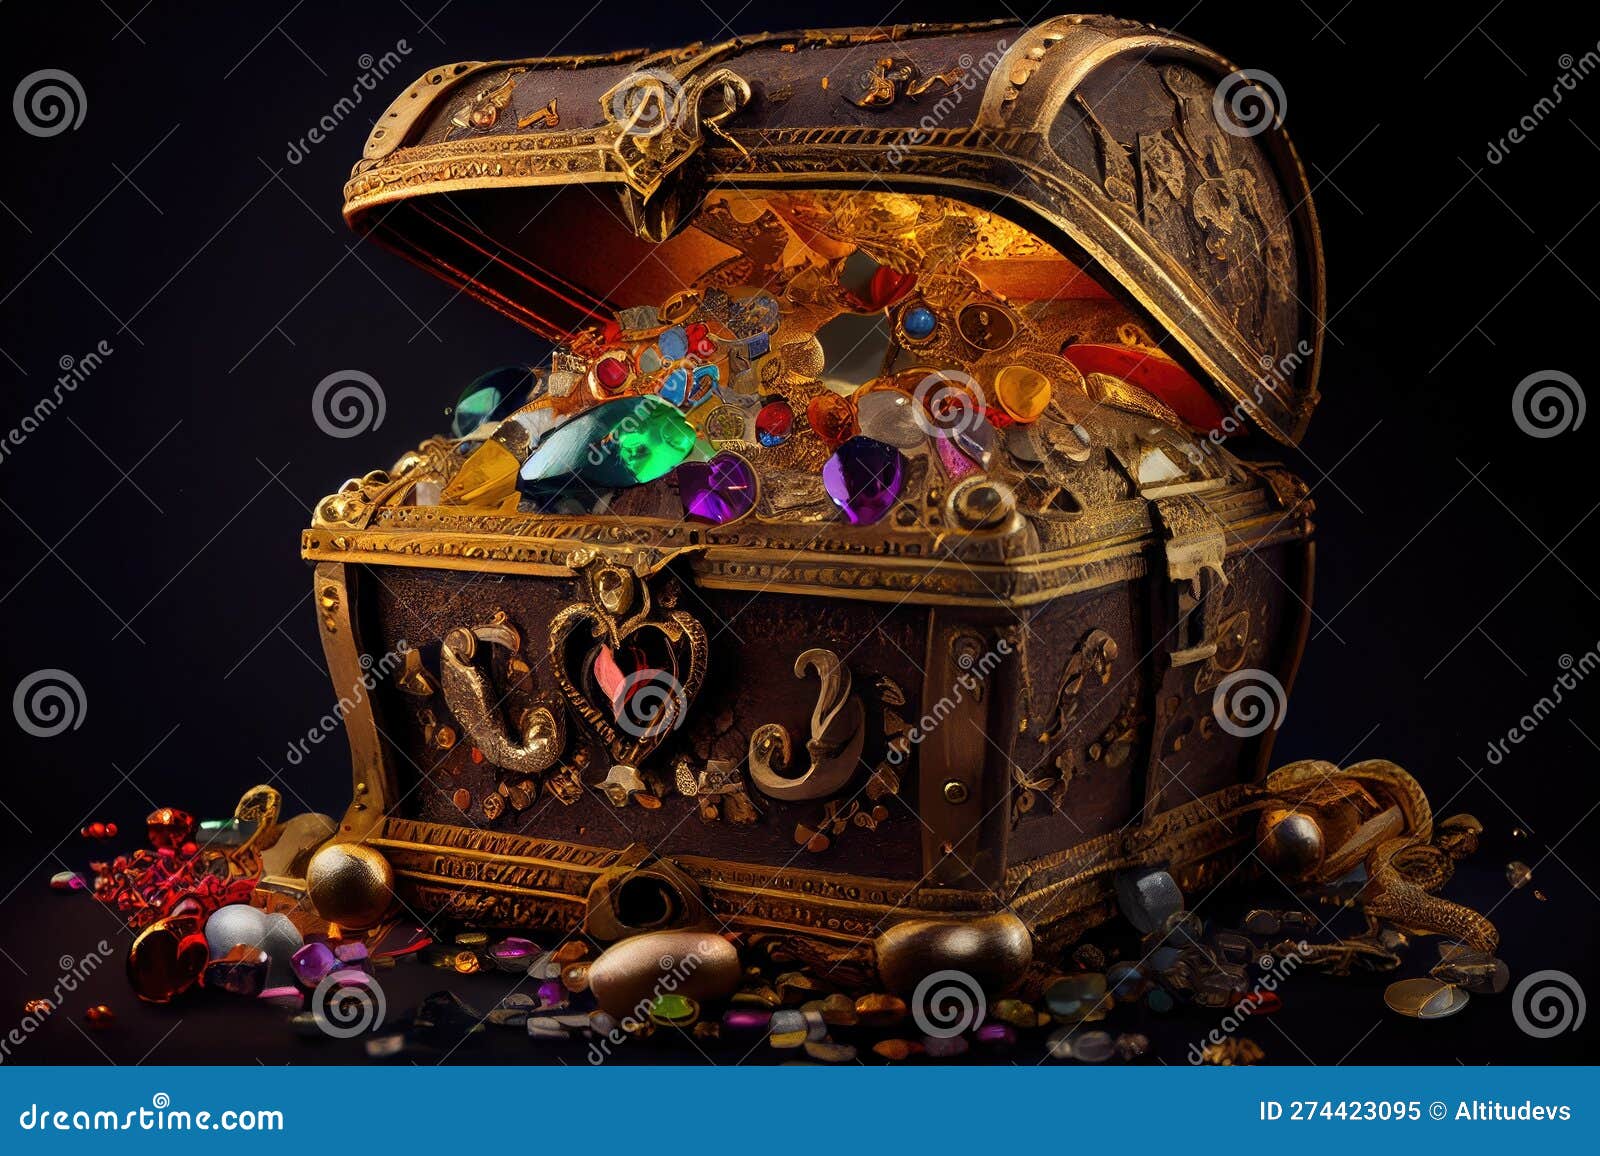 Treasure Chest Overflowing with Gold and Jewels Stock Illustration